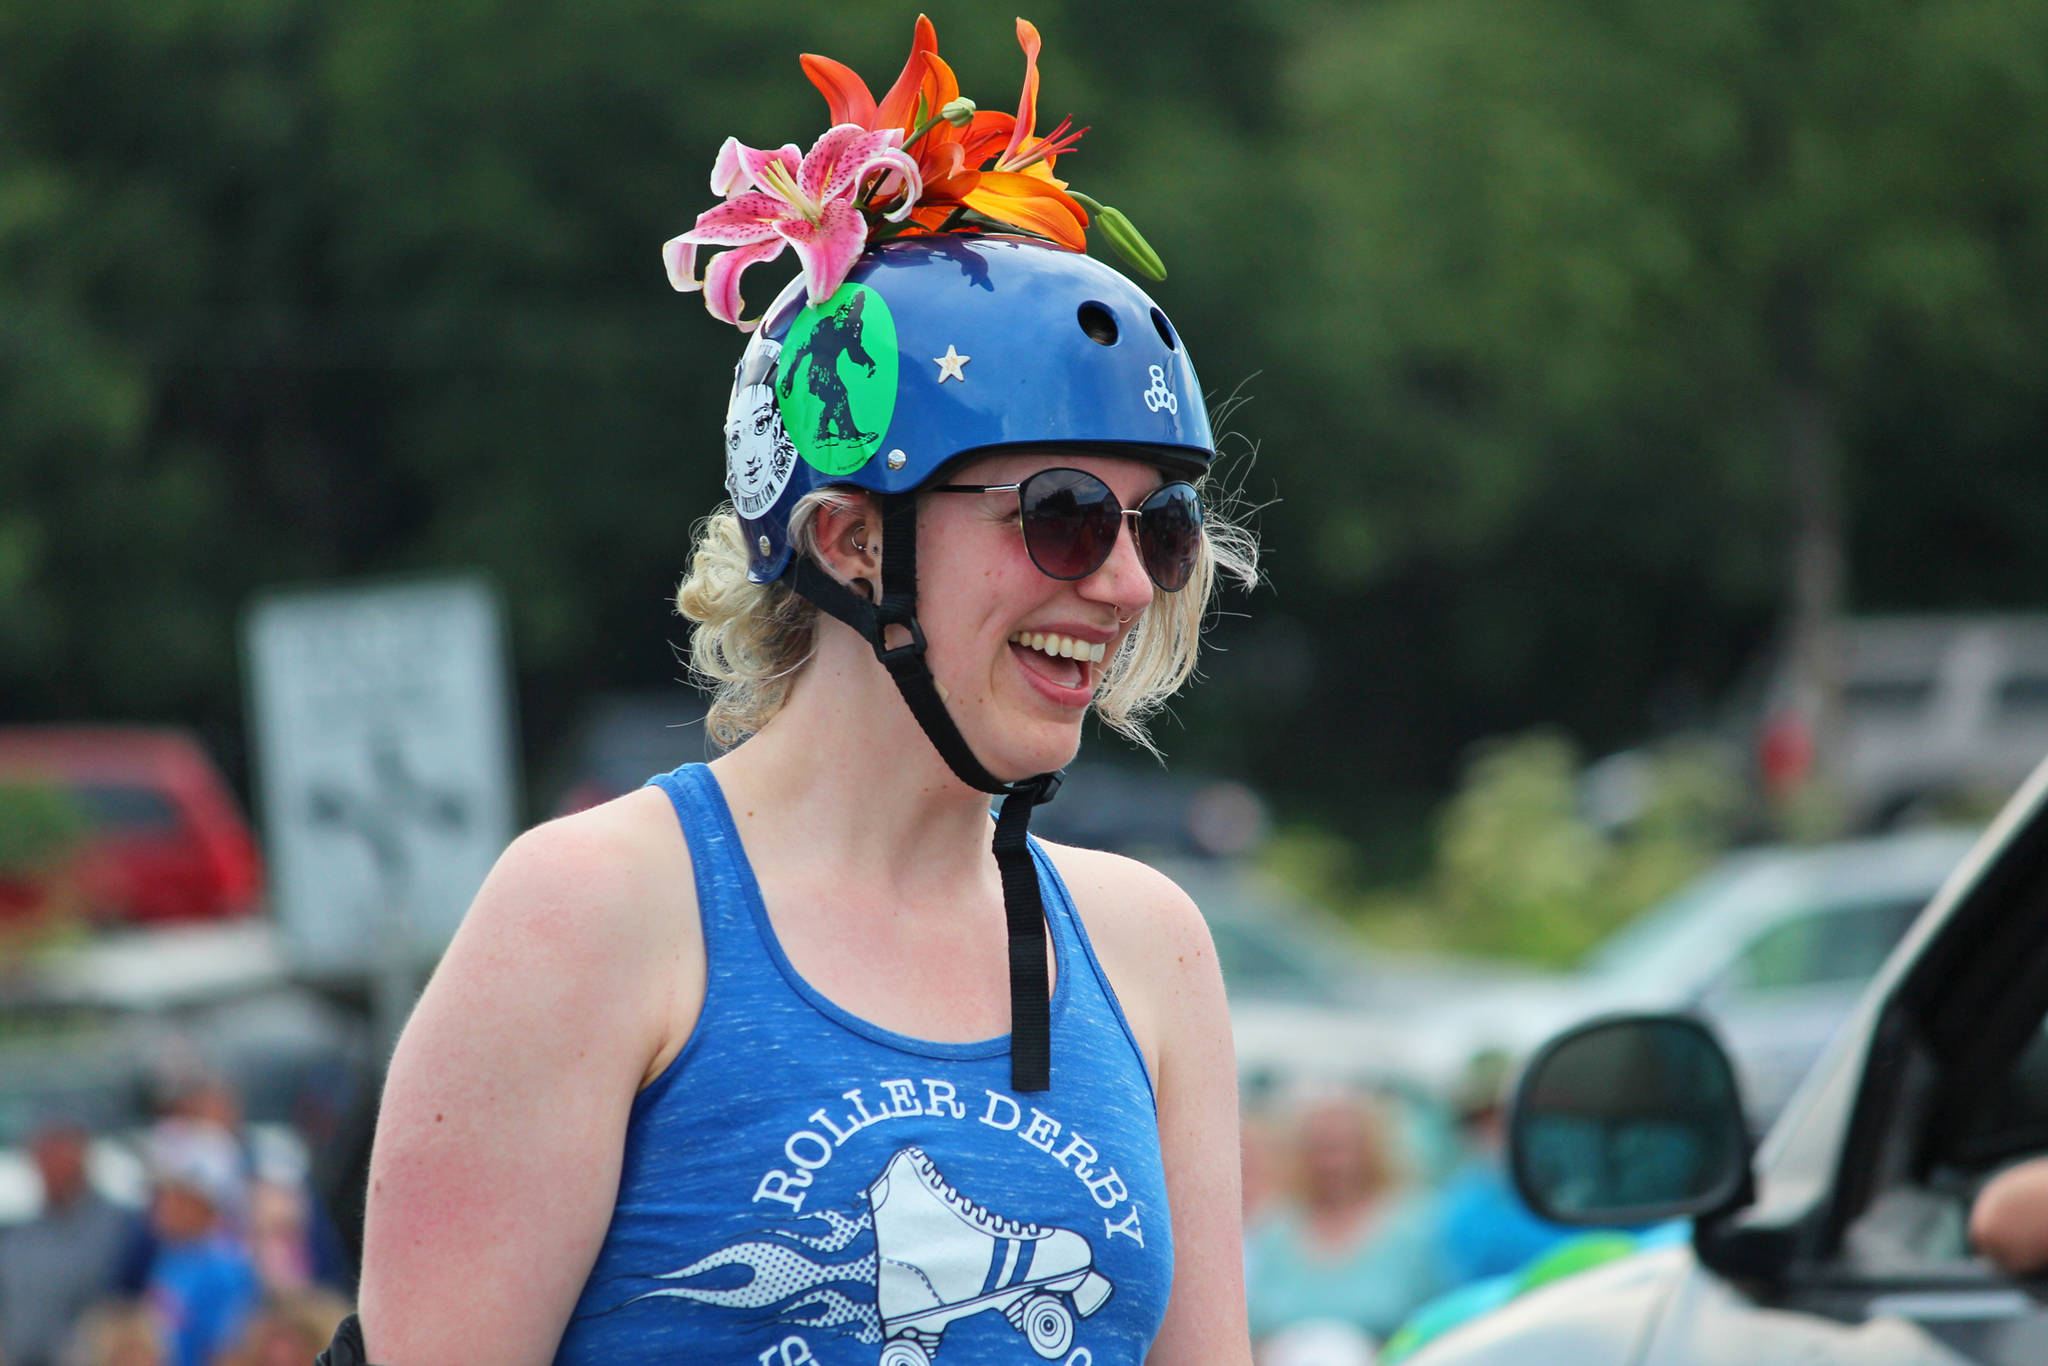 A member of the Spit City Sirens roller derby team skates through this year’s July Fourth parade, hosted by the Homer Chamber of Commerce, on Thursday, July 4, 2019 on Pioneer Avenue in Homer, Alaska. (Photo by Megan Pacer/Homer News)